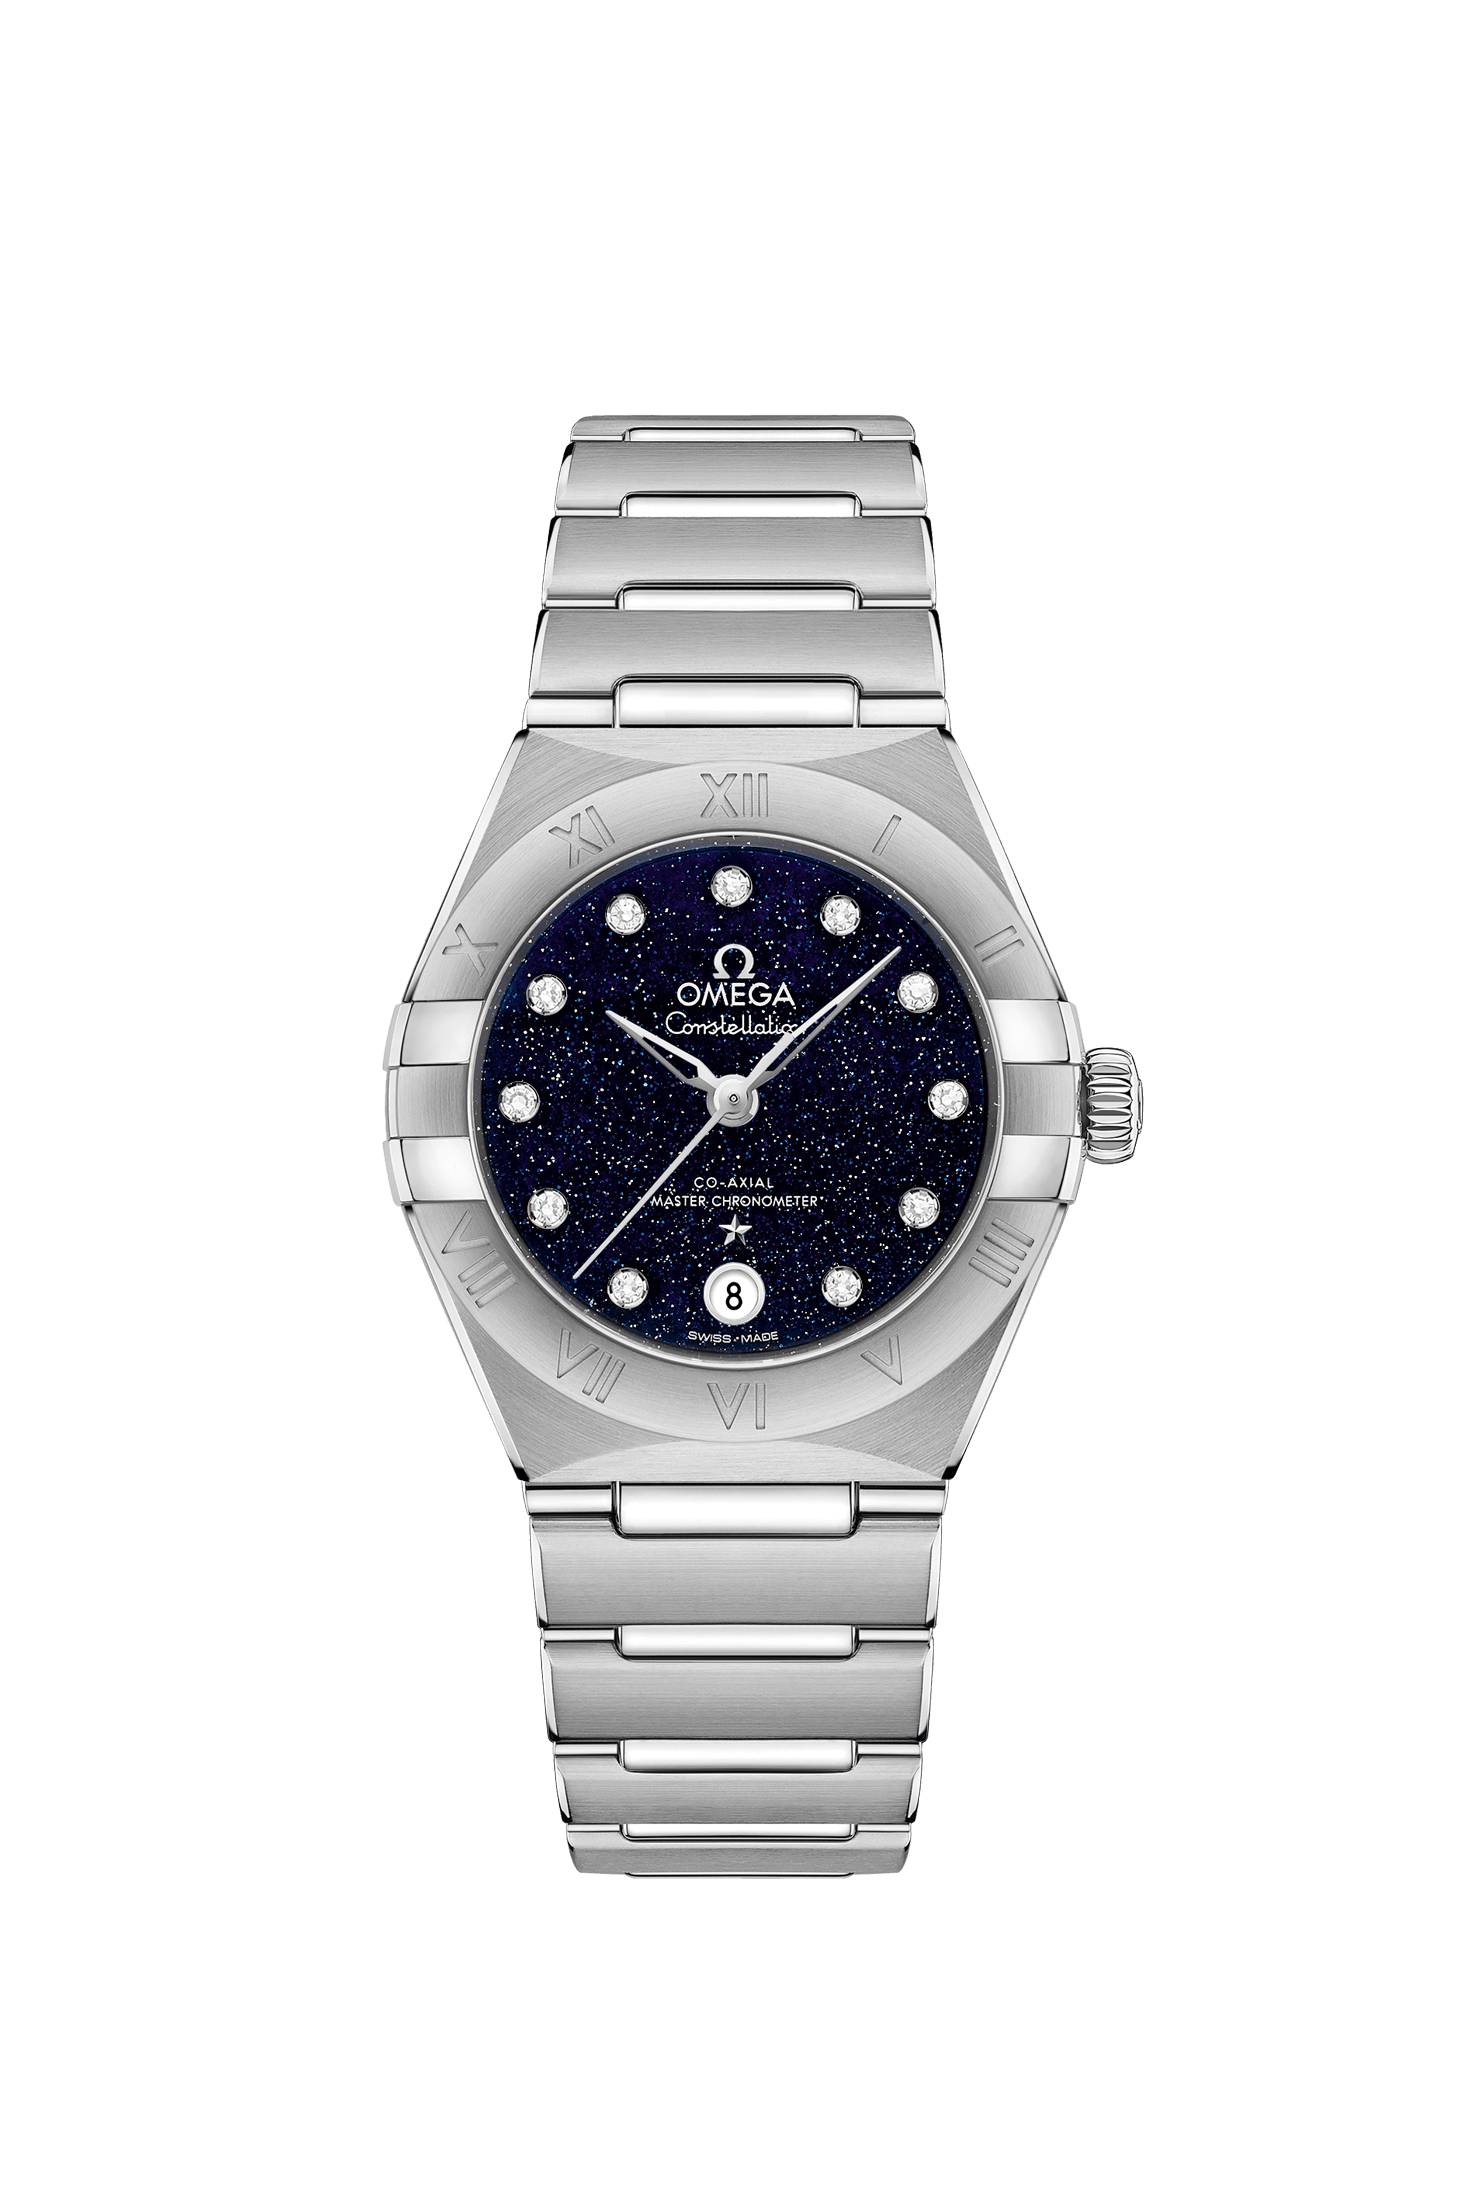 Ladies' watch  OMEGA, Constellation Co Axial Master Chronometer / 29mm, SKU: 131.10.29.20.53.001 | watchapproach.com